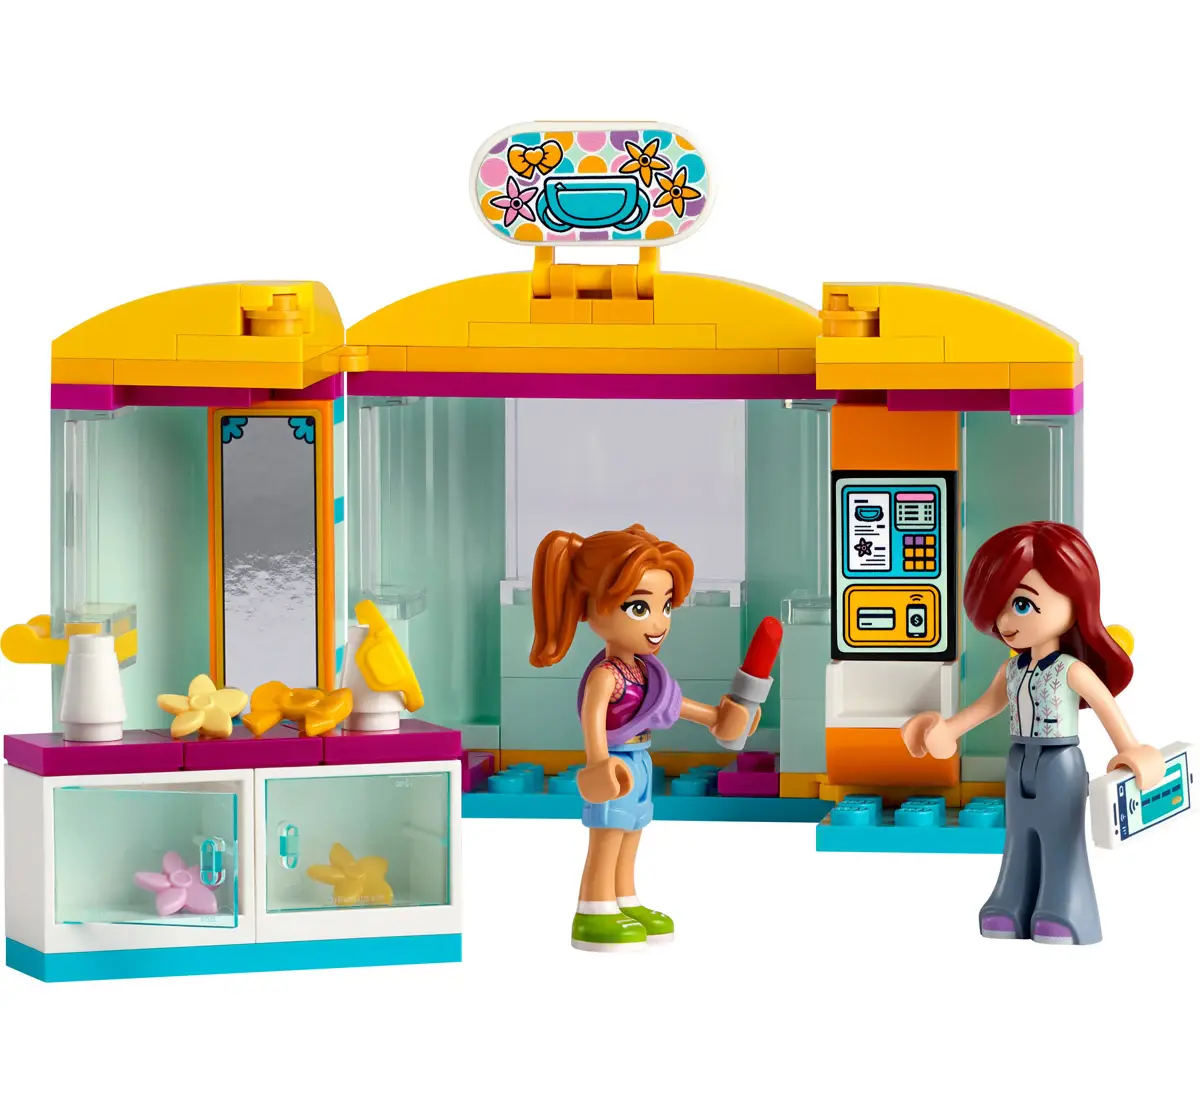 Lego Friends Tiny Accessories Store Toy 42608 Multicolour For Kids Ages 6Y+ (129 Pieces) 